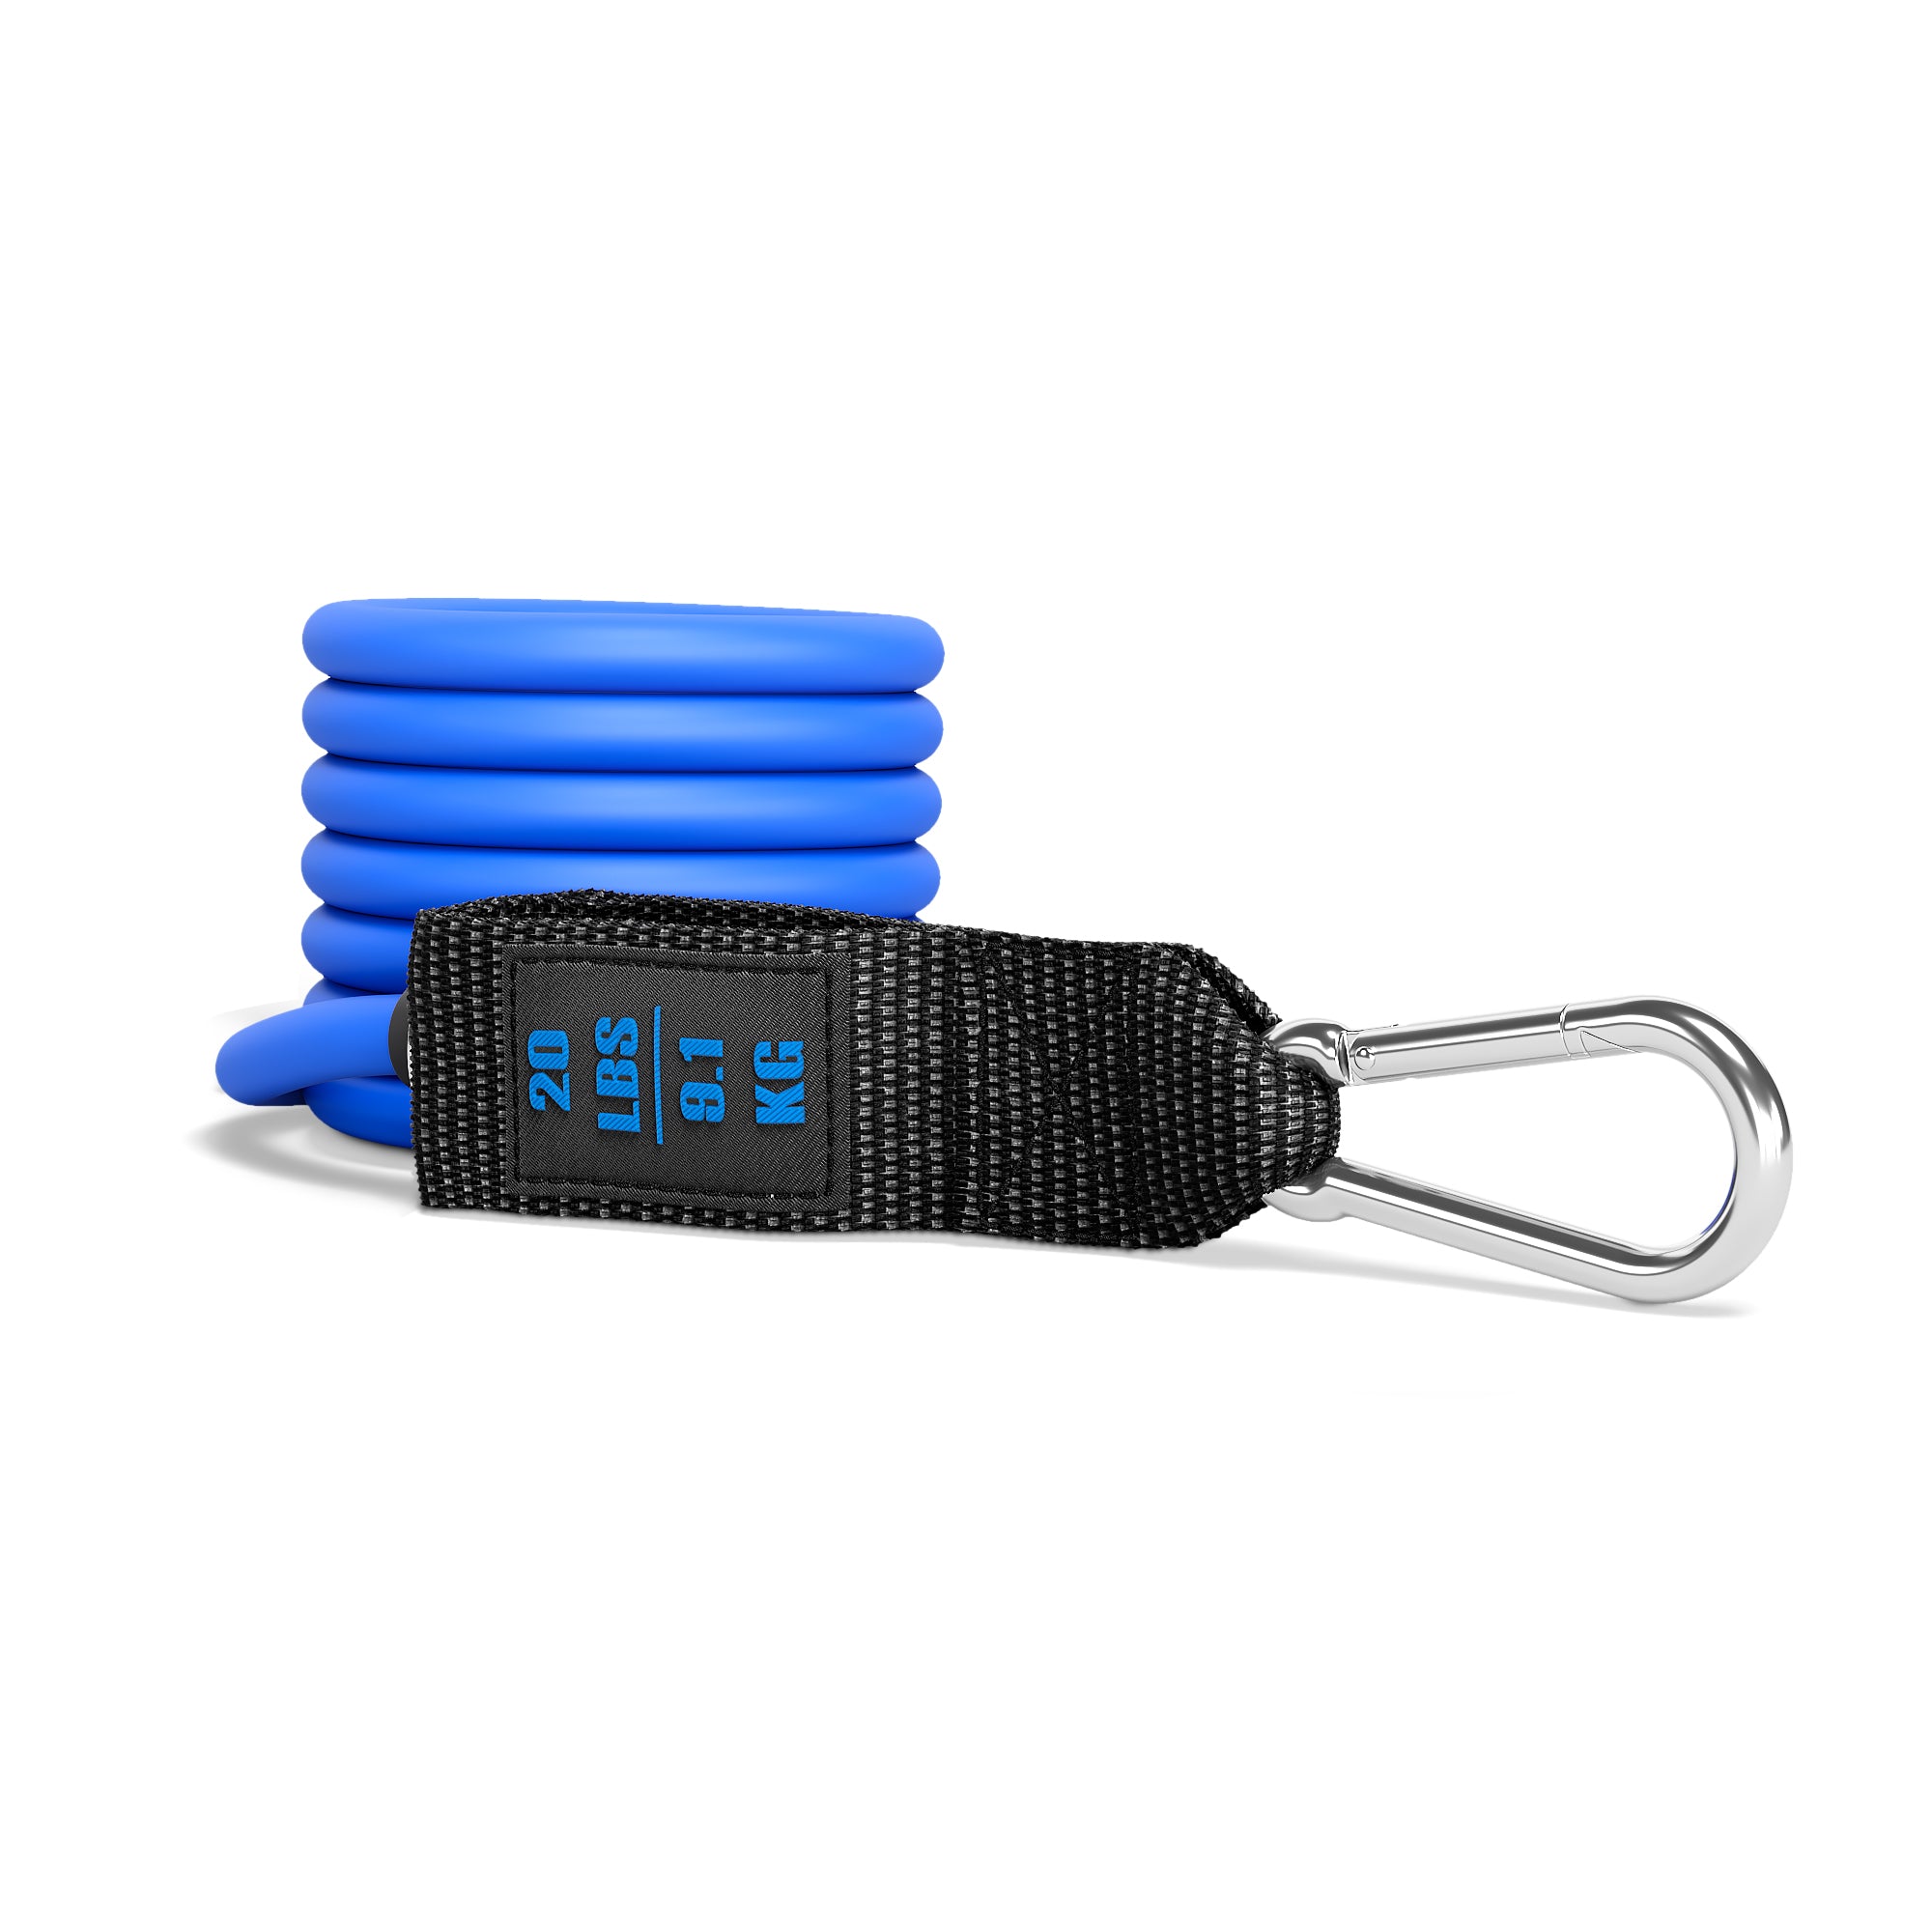 Replacement Bands for Resistance Band Set